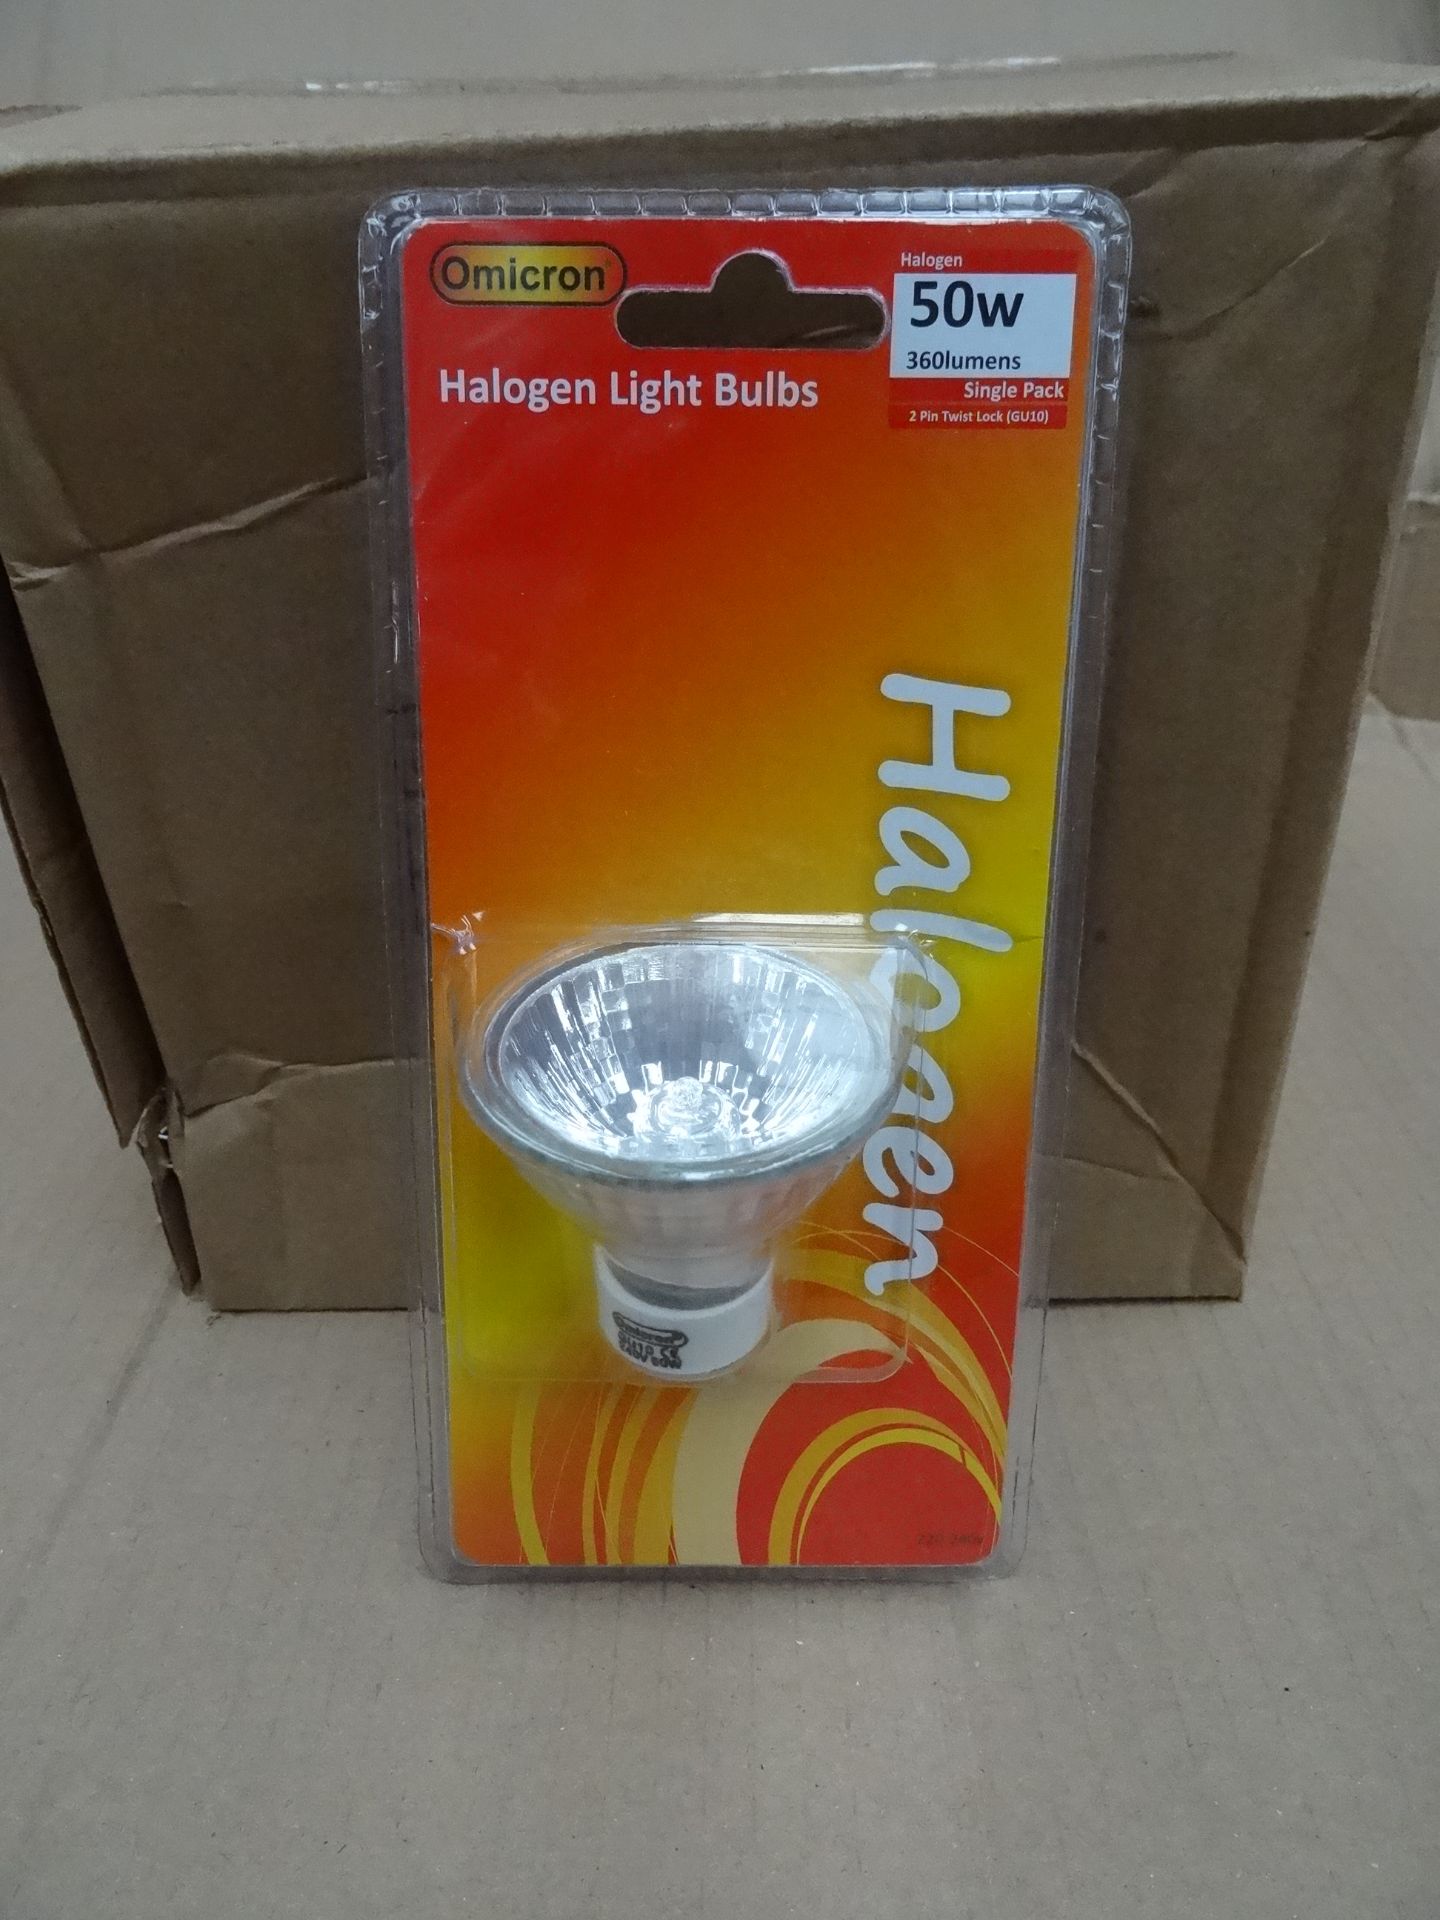 12 x Omicron 50w Halogen Light Bulbs. Brand new and Packaged. Very high retail value!  Popular 2 Pin